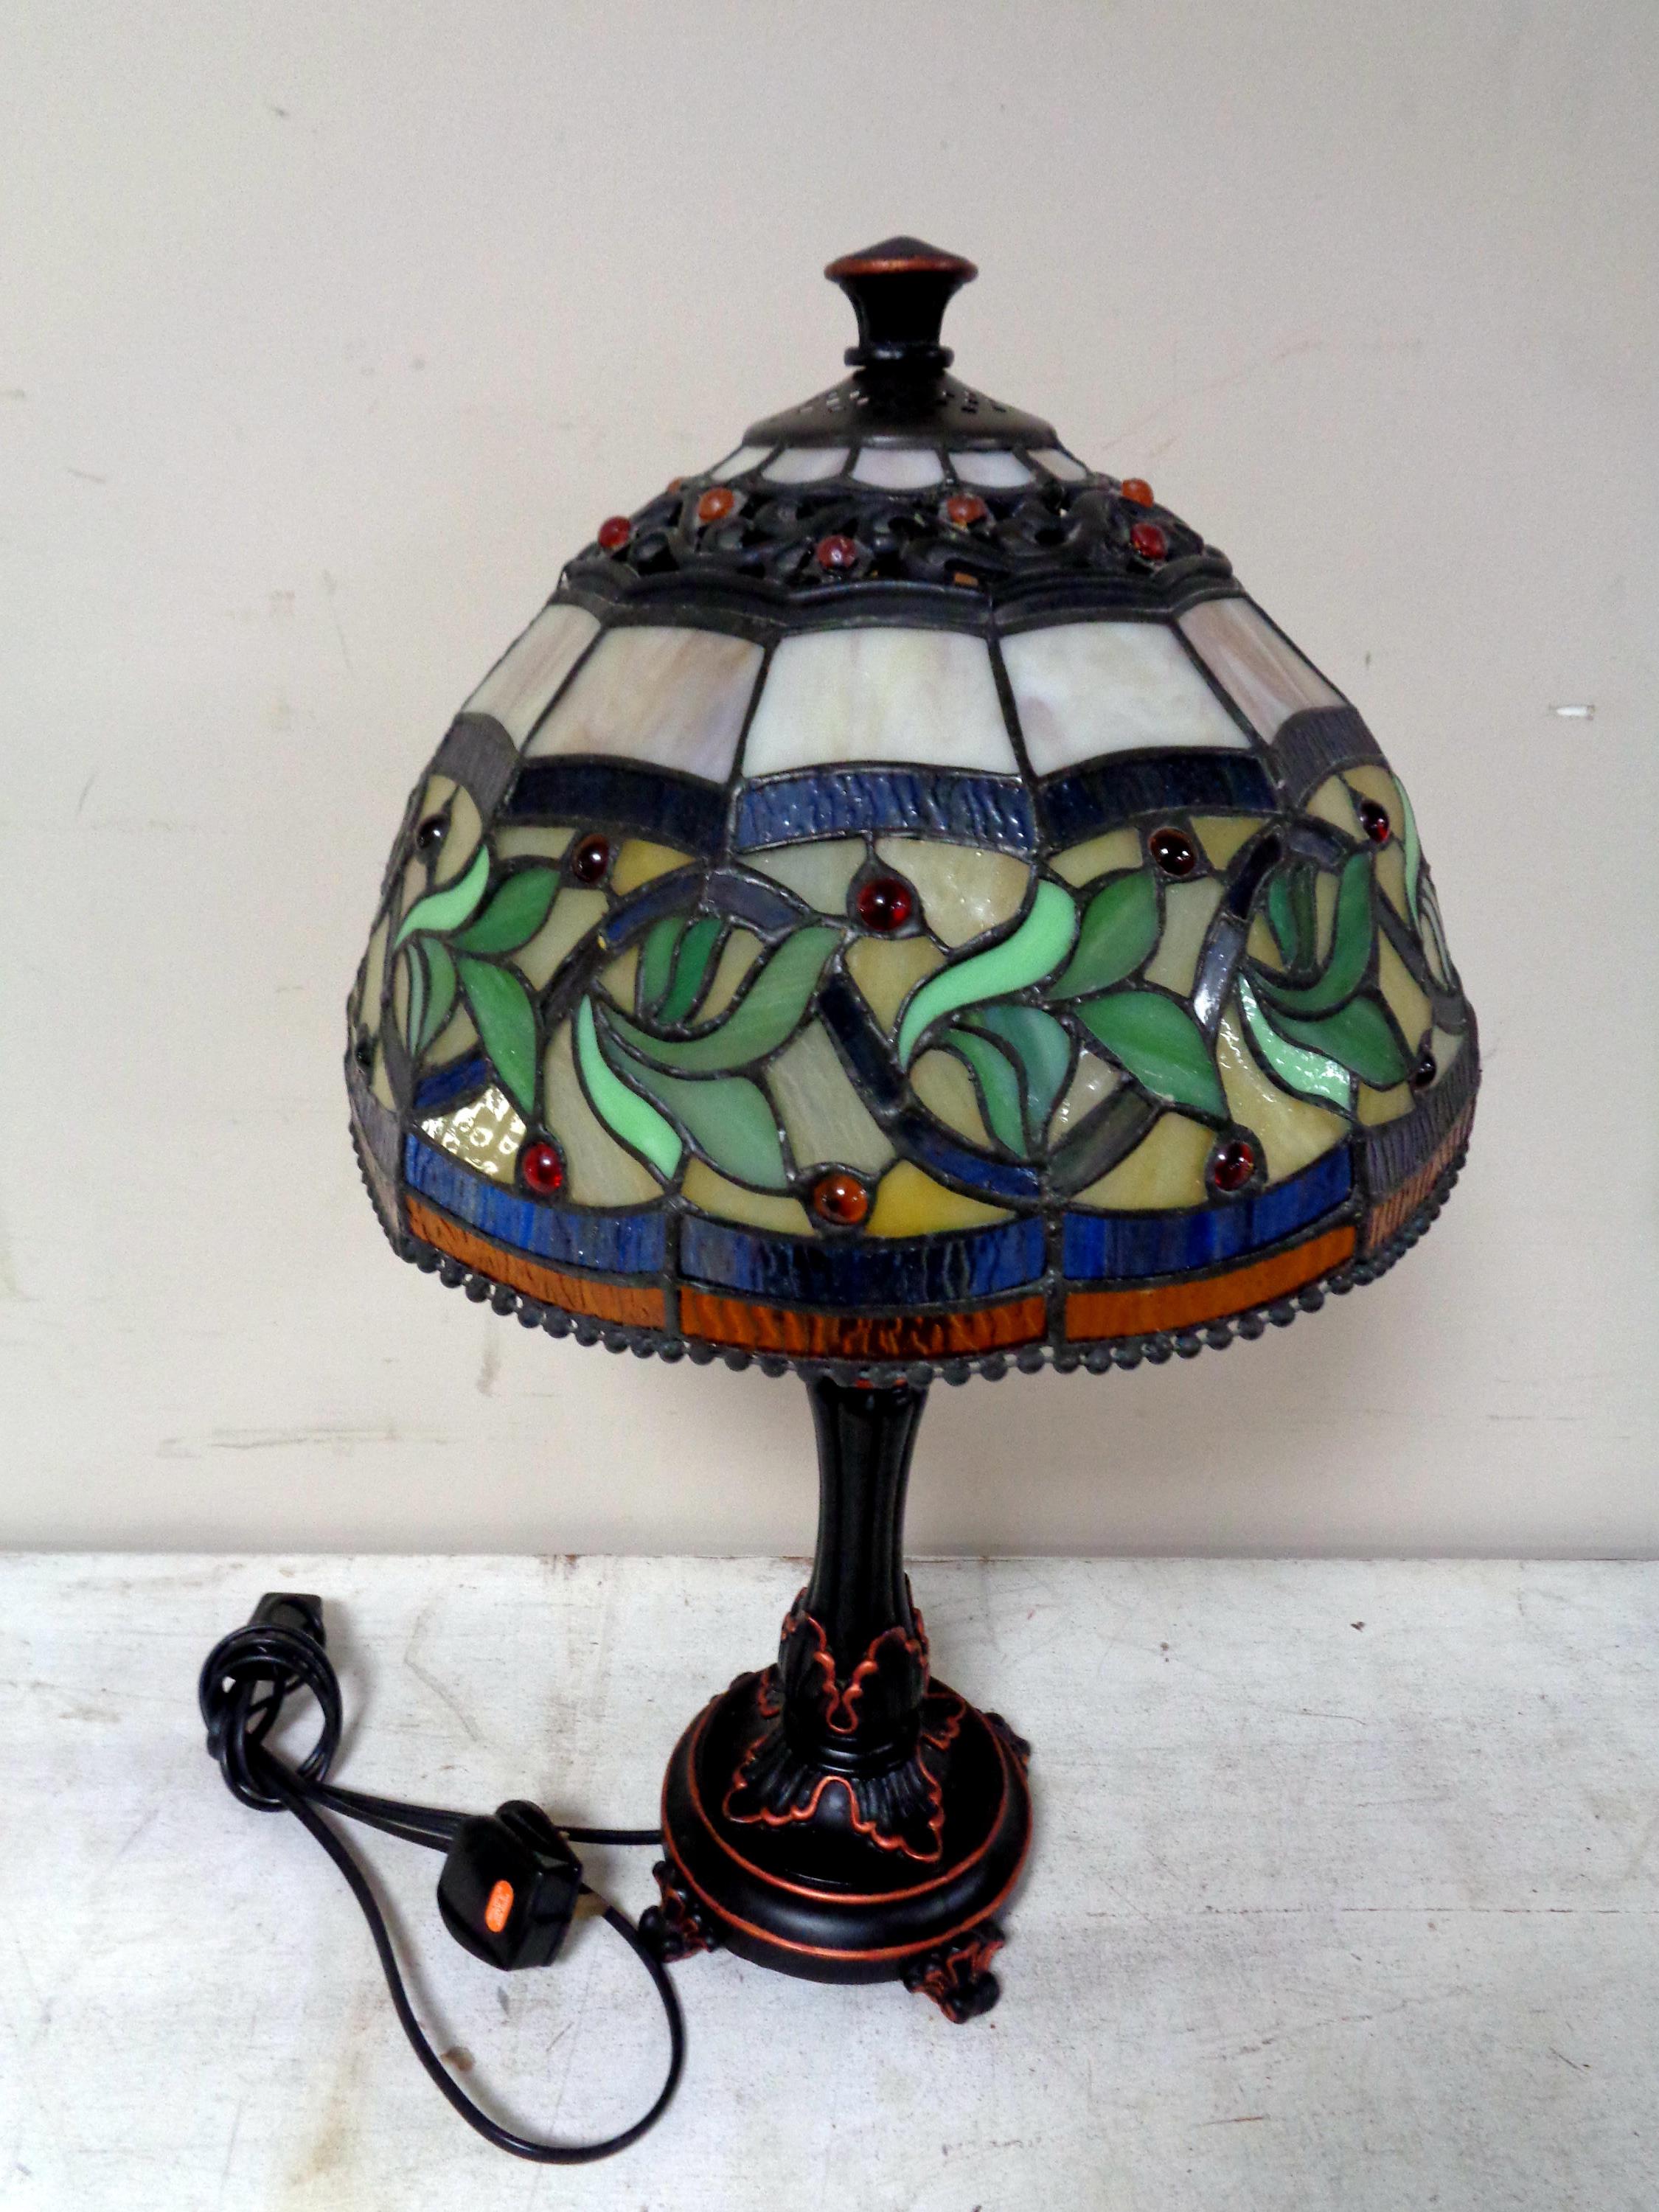 A Tiffany style table lamp with leaded glass shade